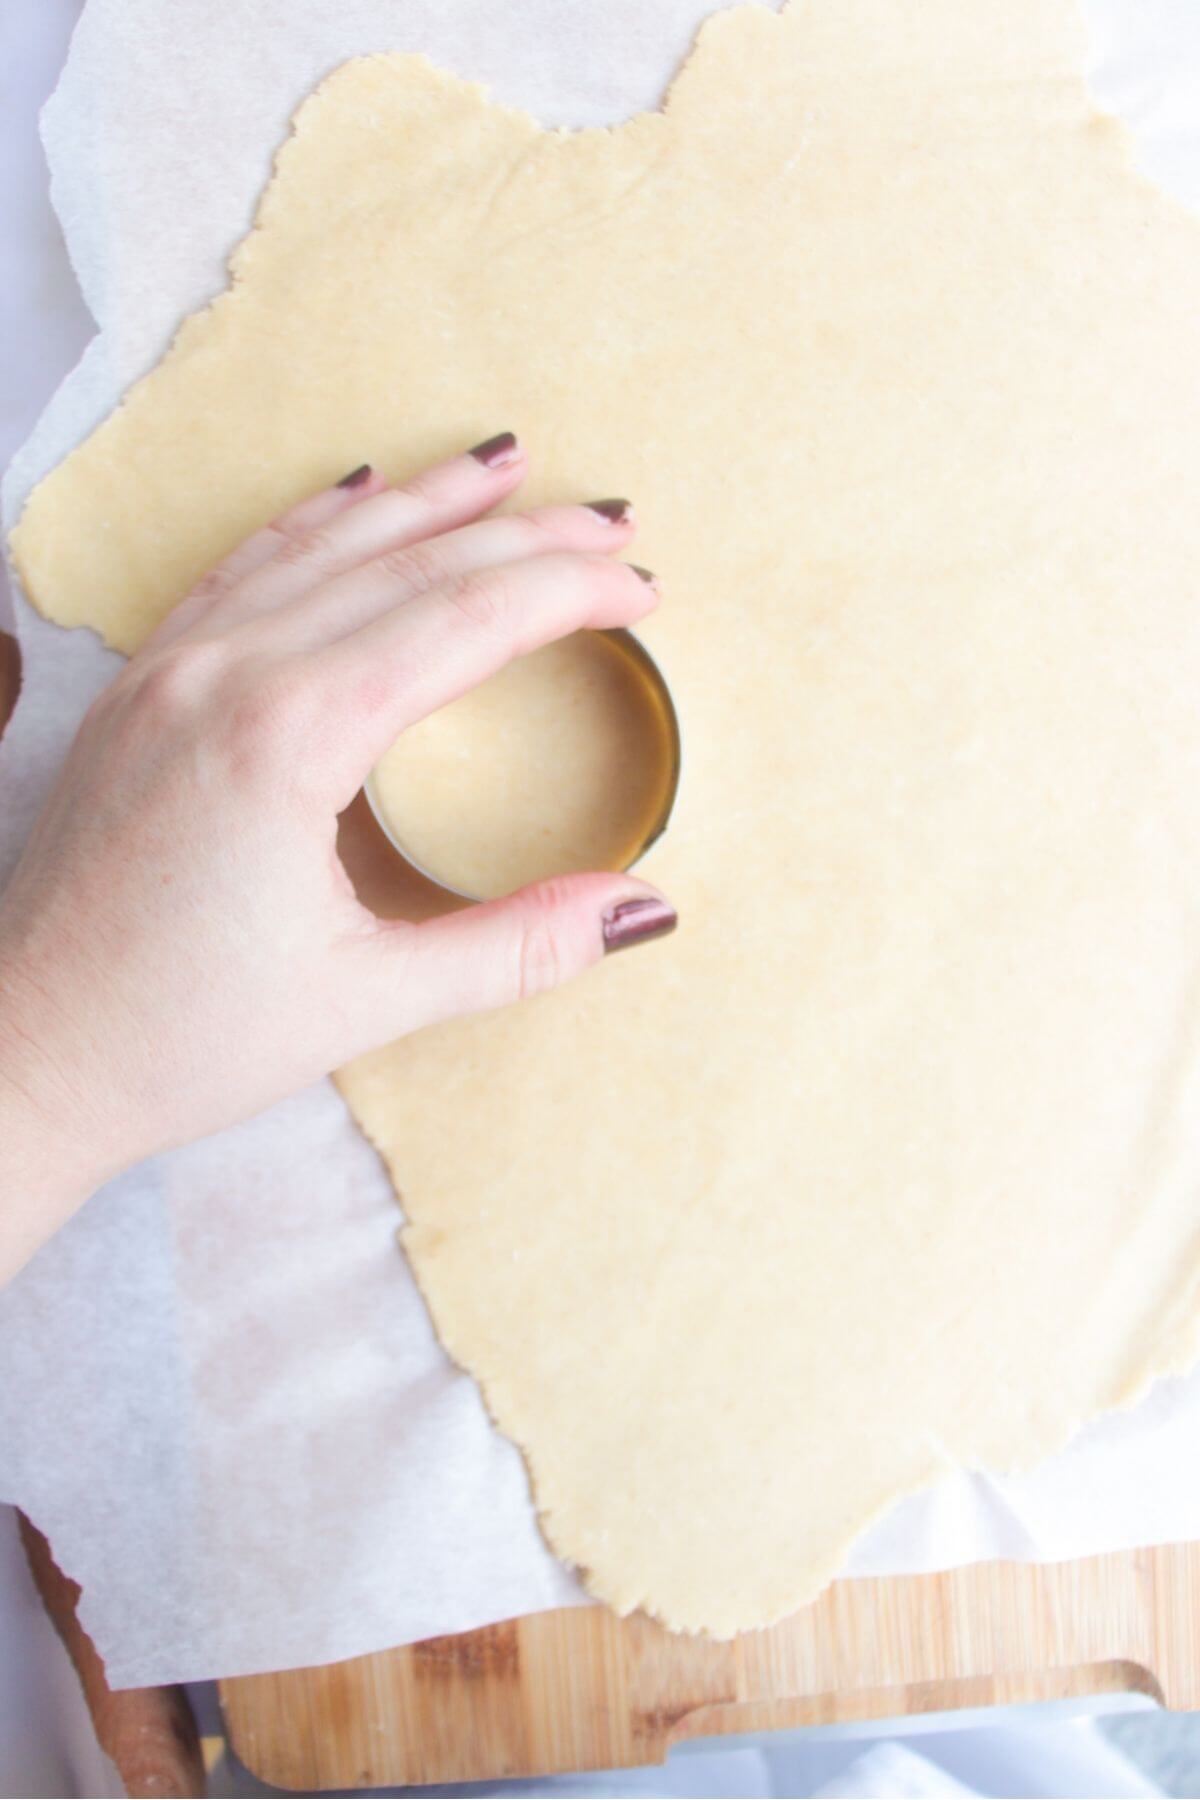 Hand using a small cookie cutter to cut out circles of pastry.